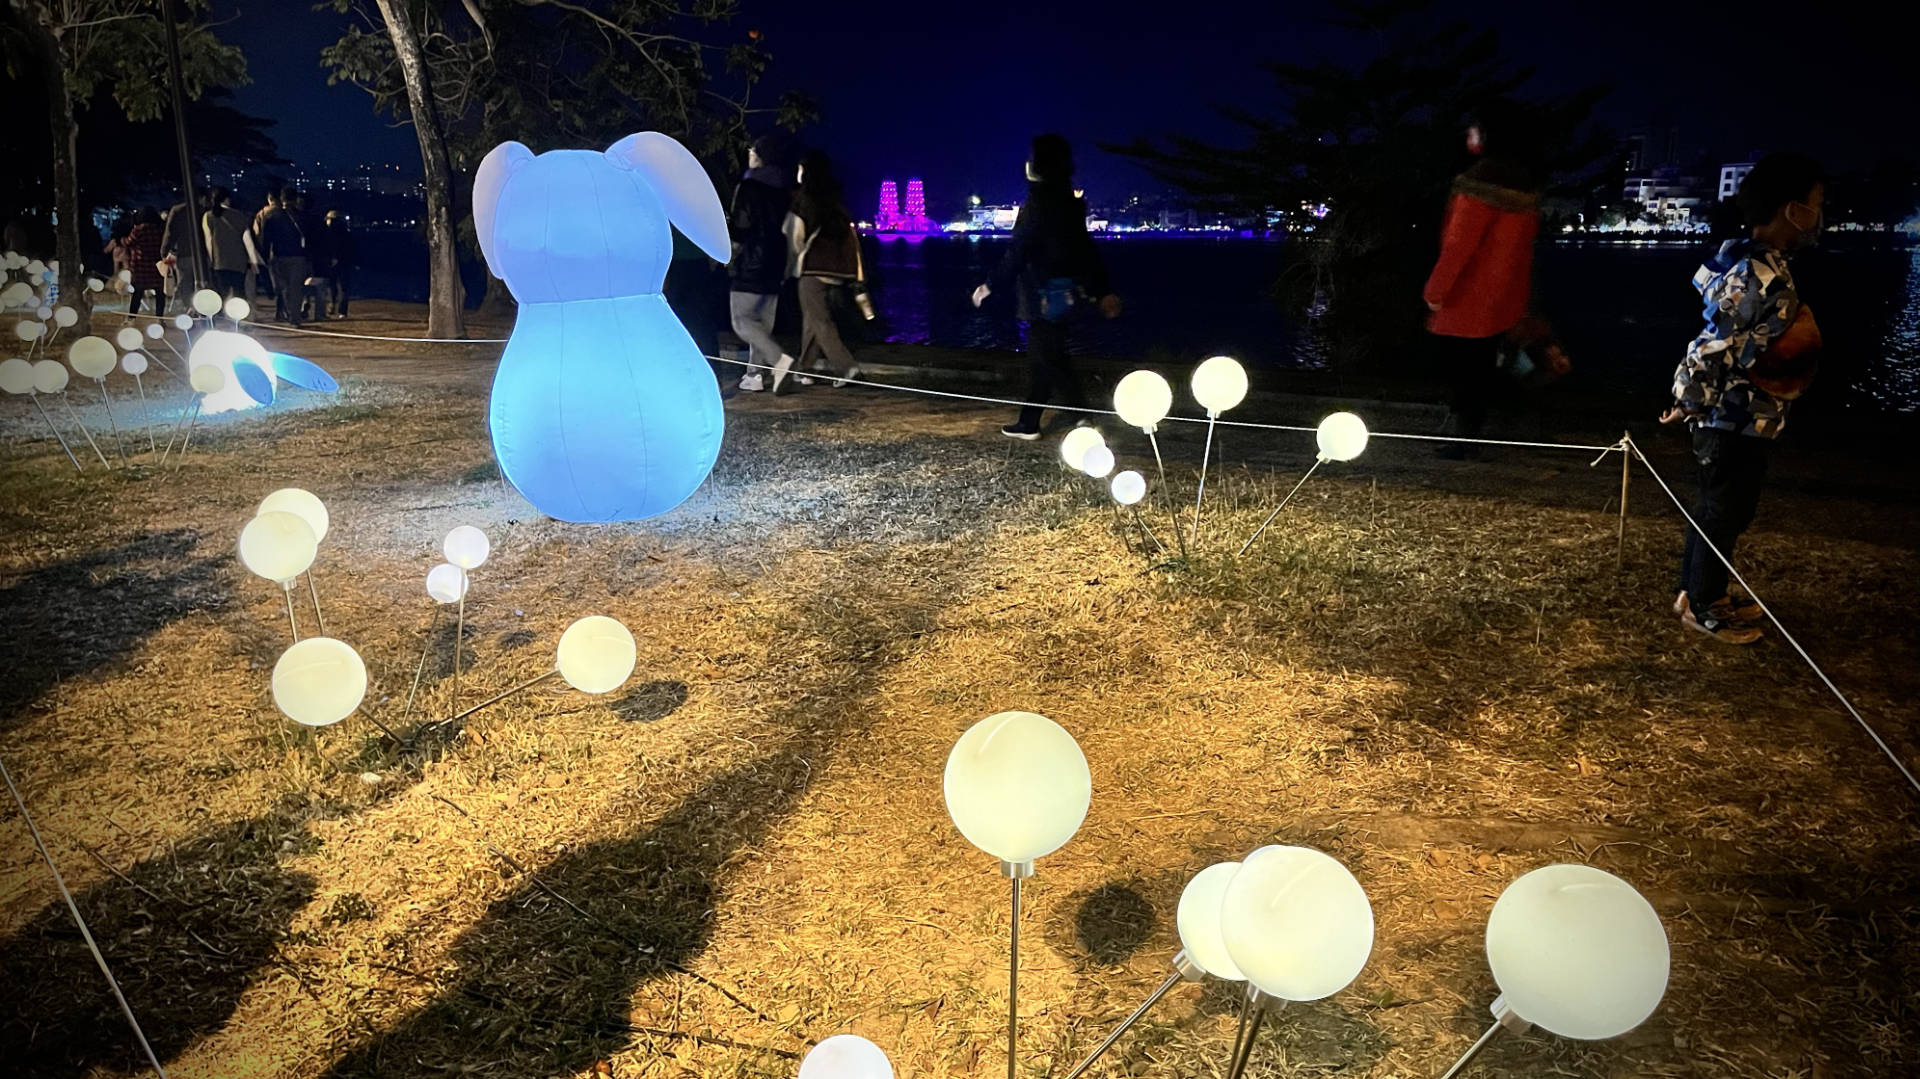 Illuminated orbs and an inflatable rabbit in the foreground, with Lotus Pond and the Dragon and Tiger Pagodas in the distance.